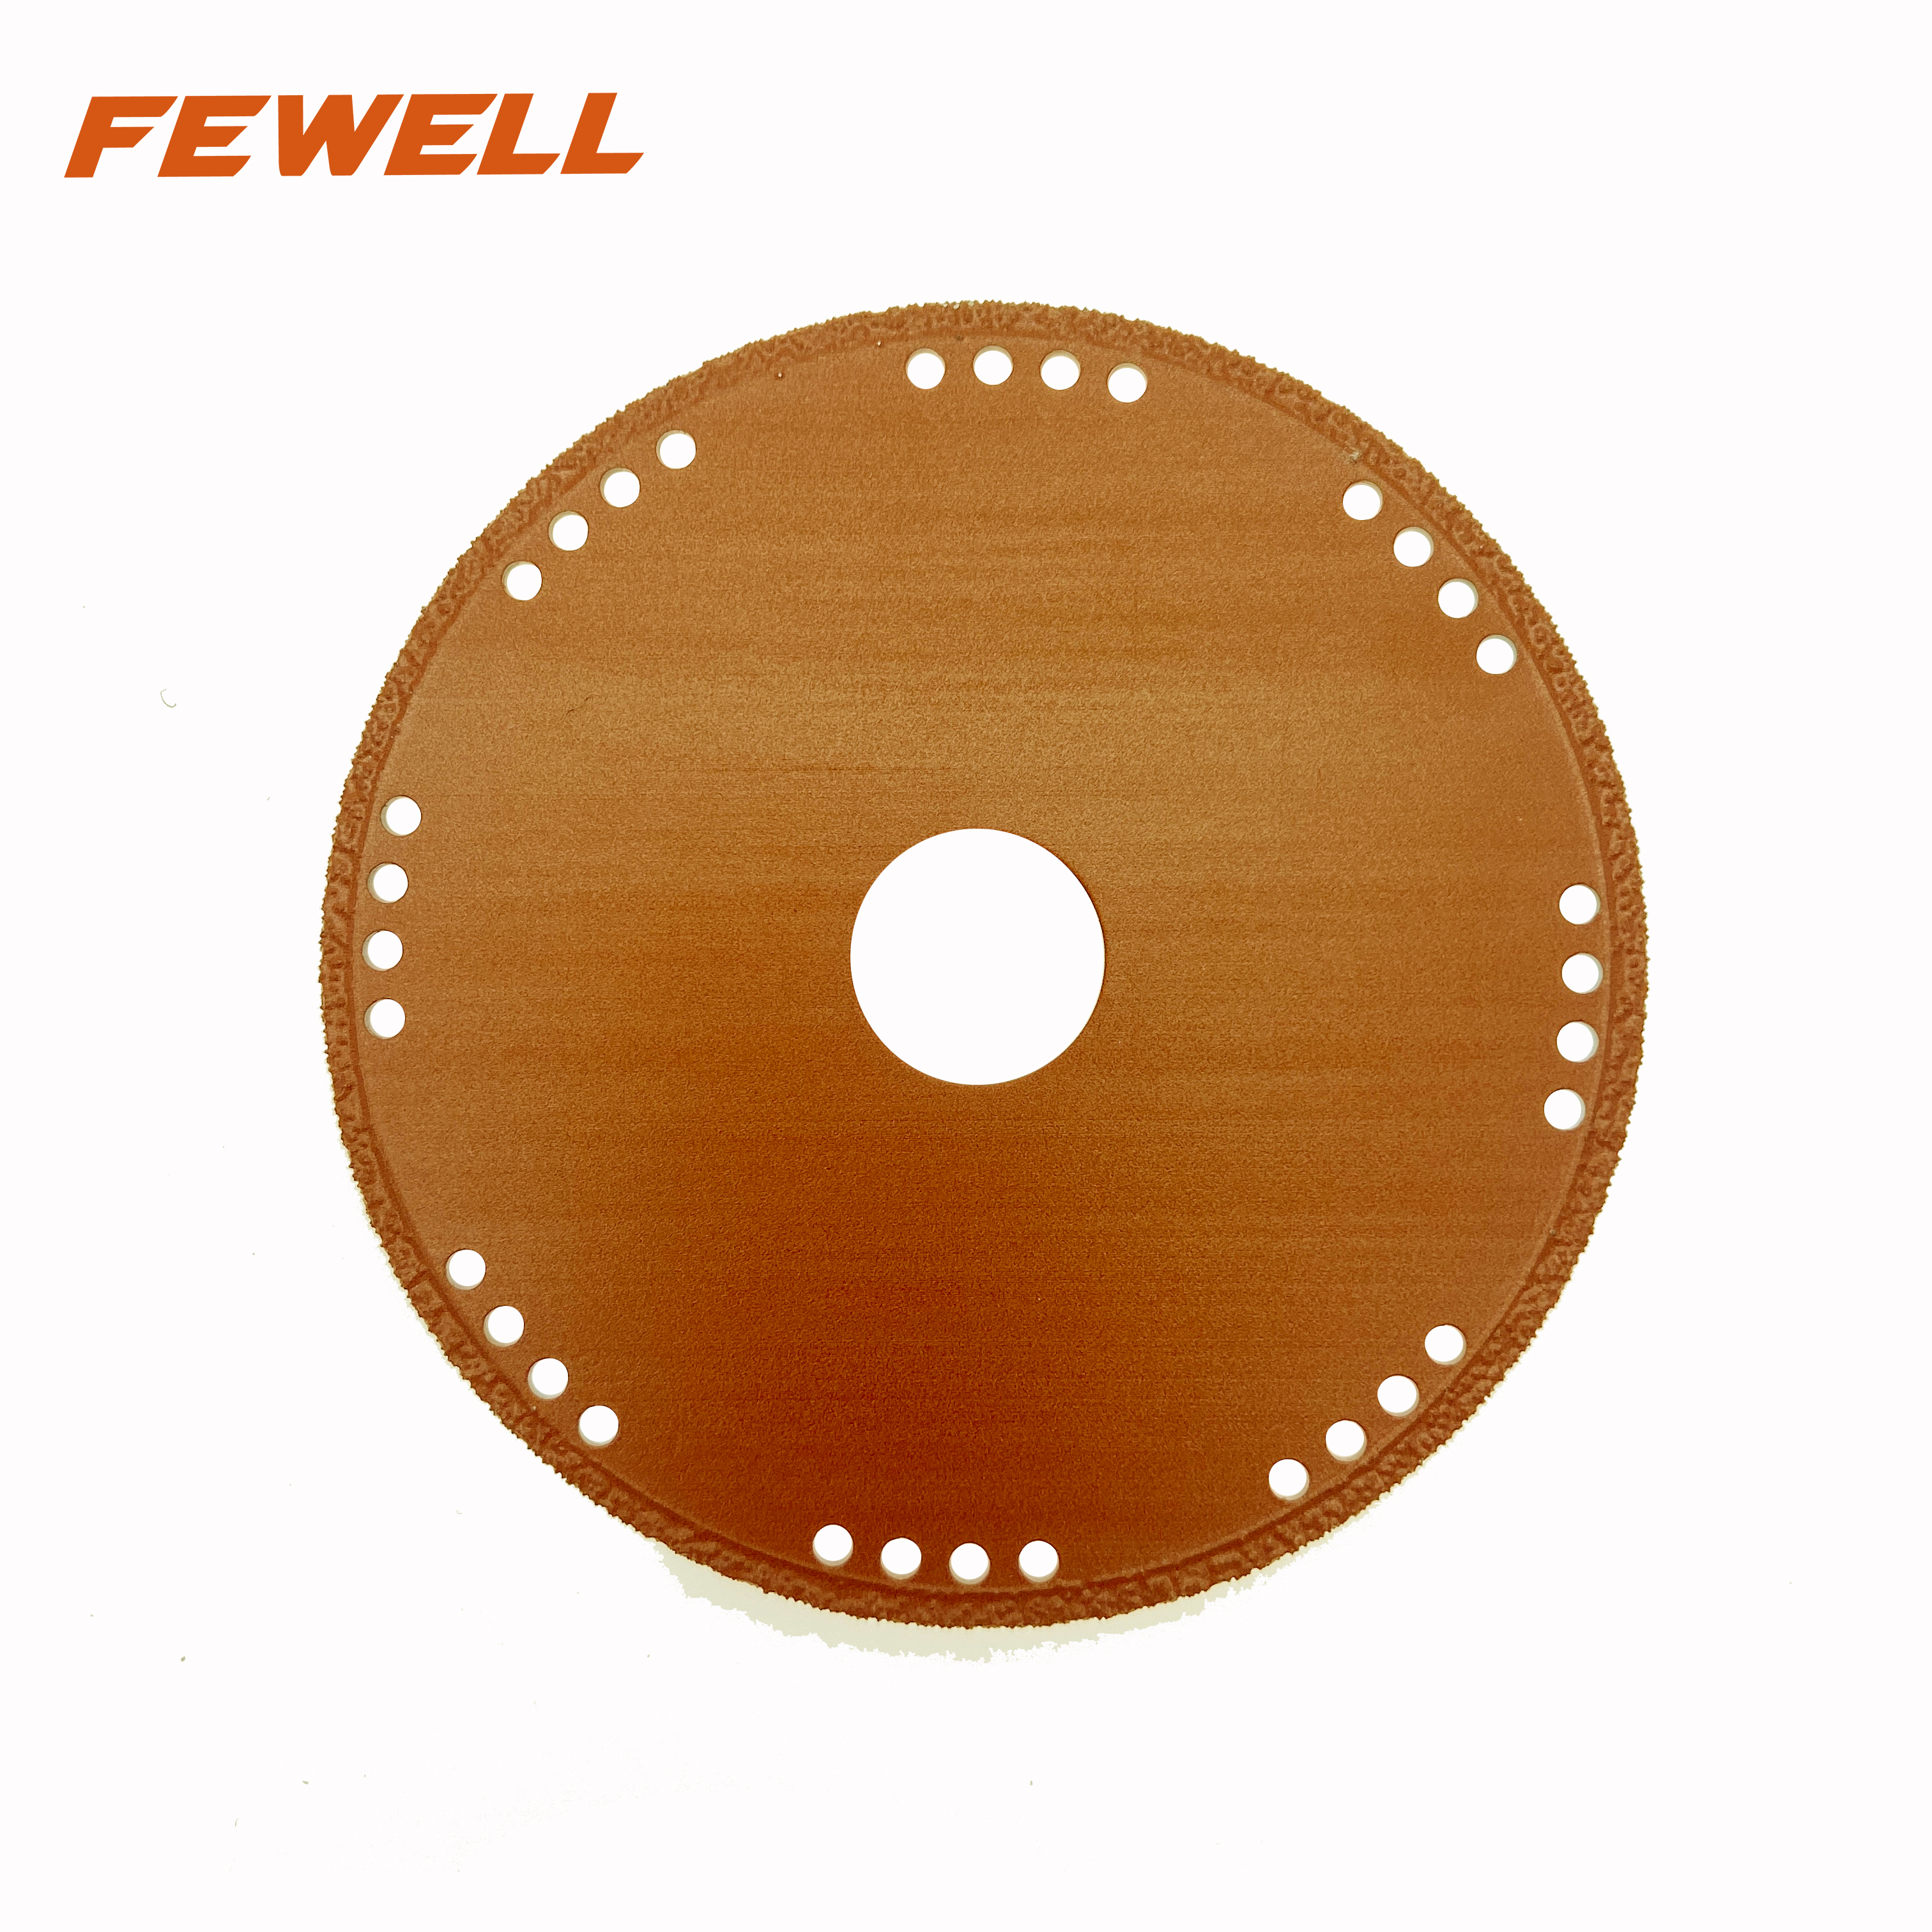 High quality Vacuum brazed continuous rim 4/5/6inch 105/125/150mm diamond saw blade for cutting metal stainless steel